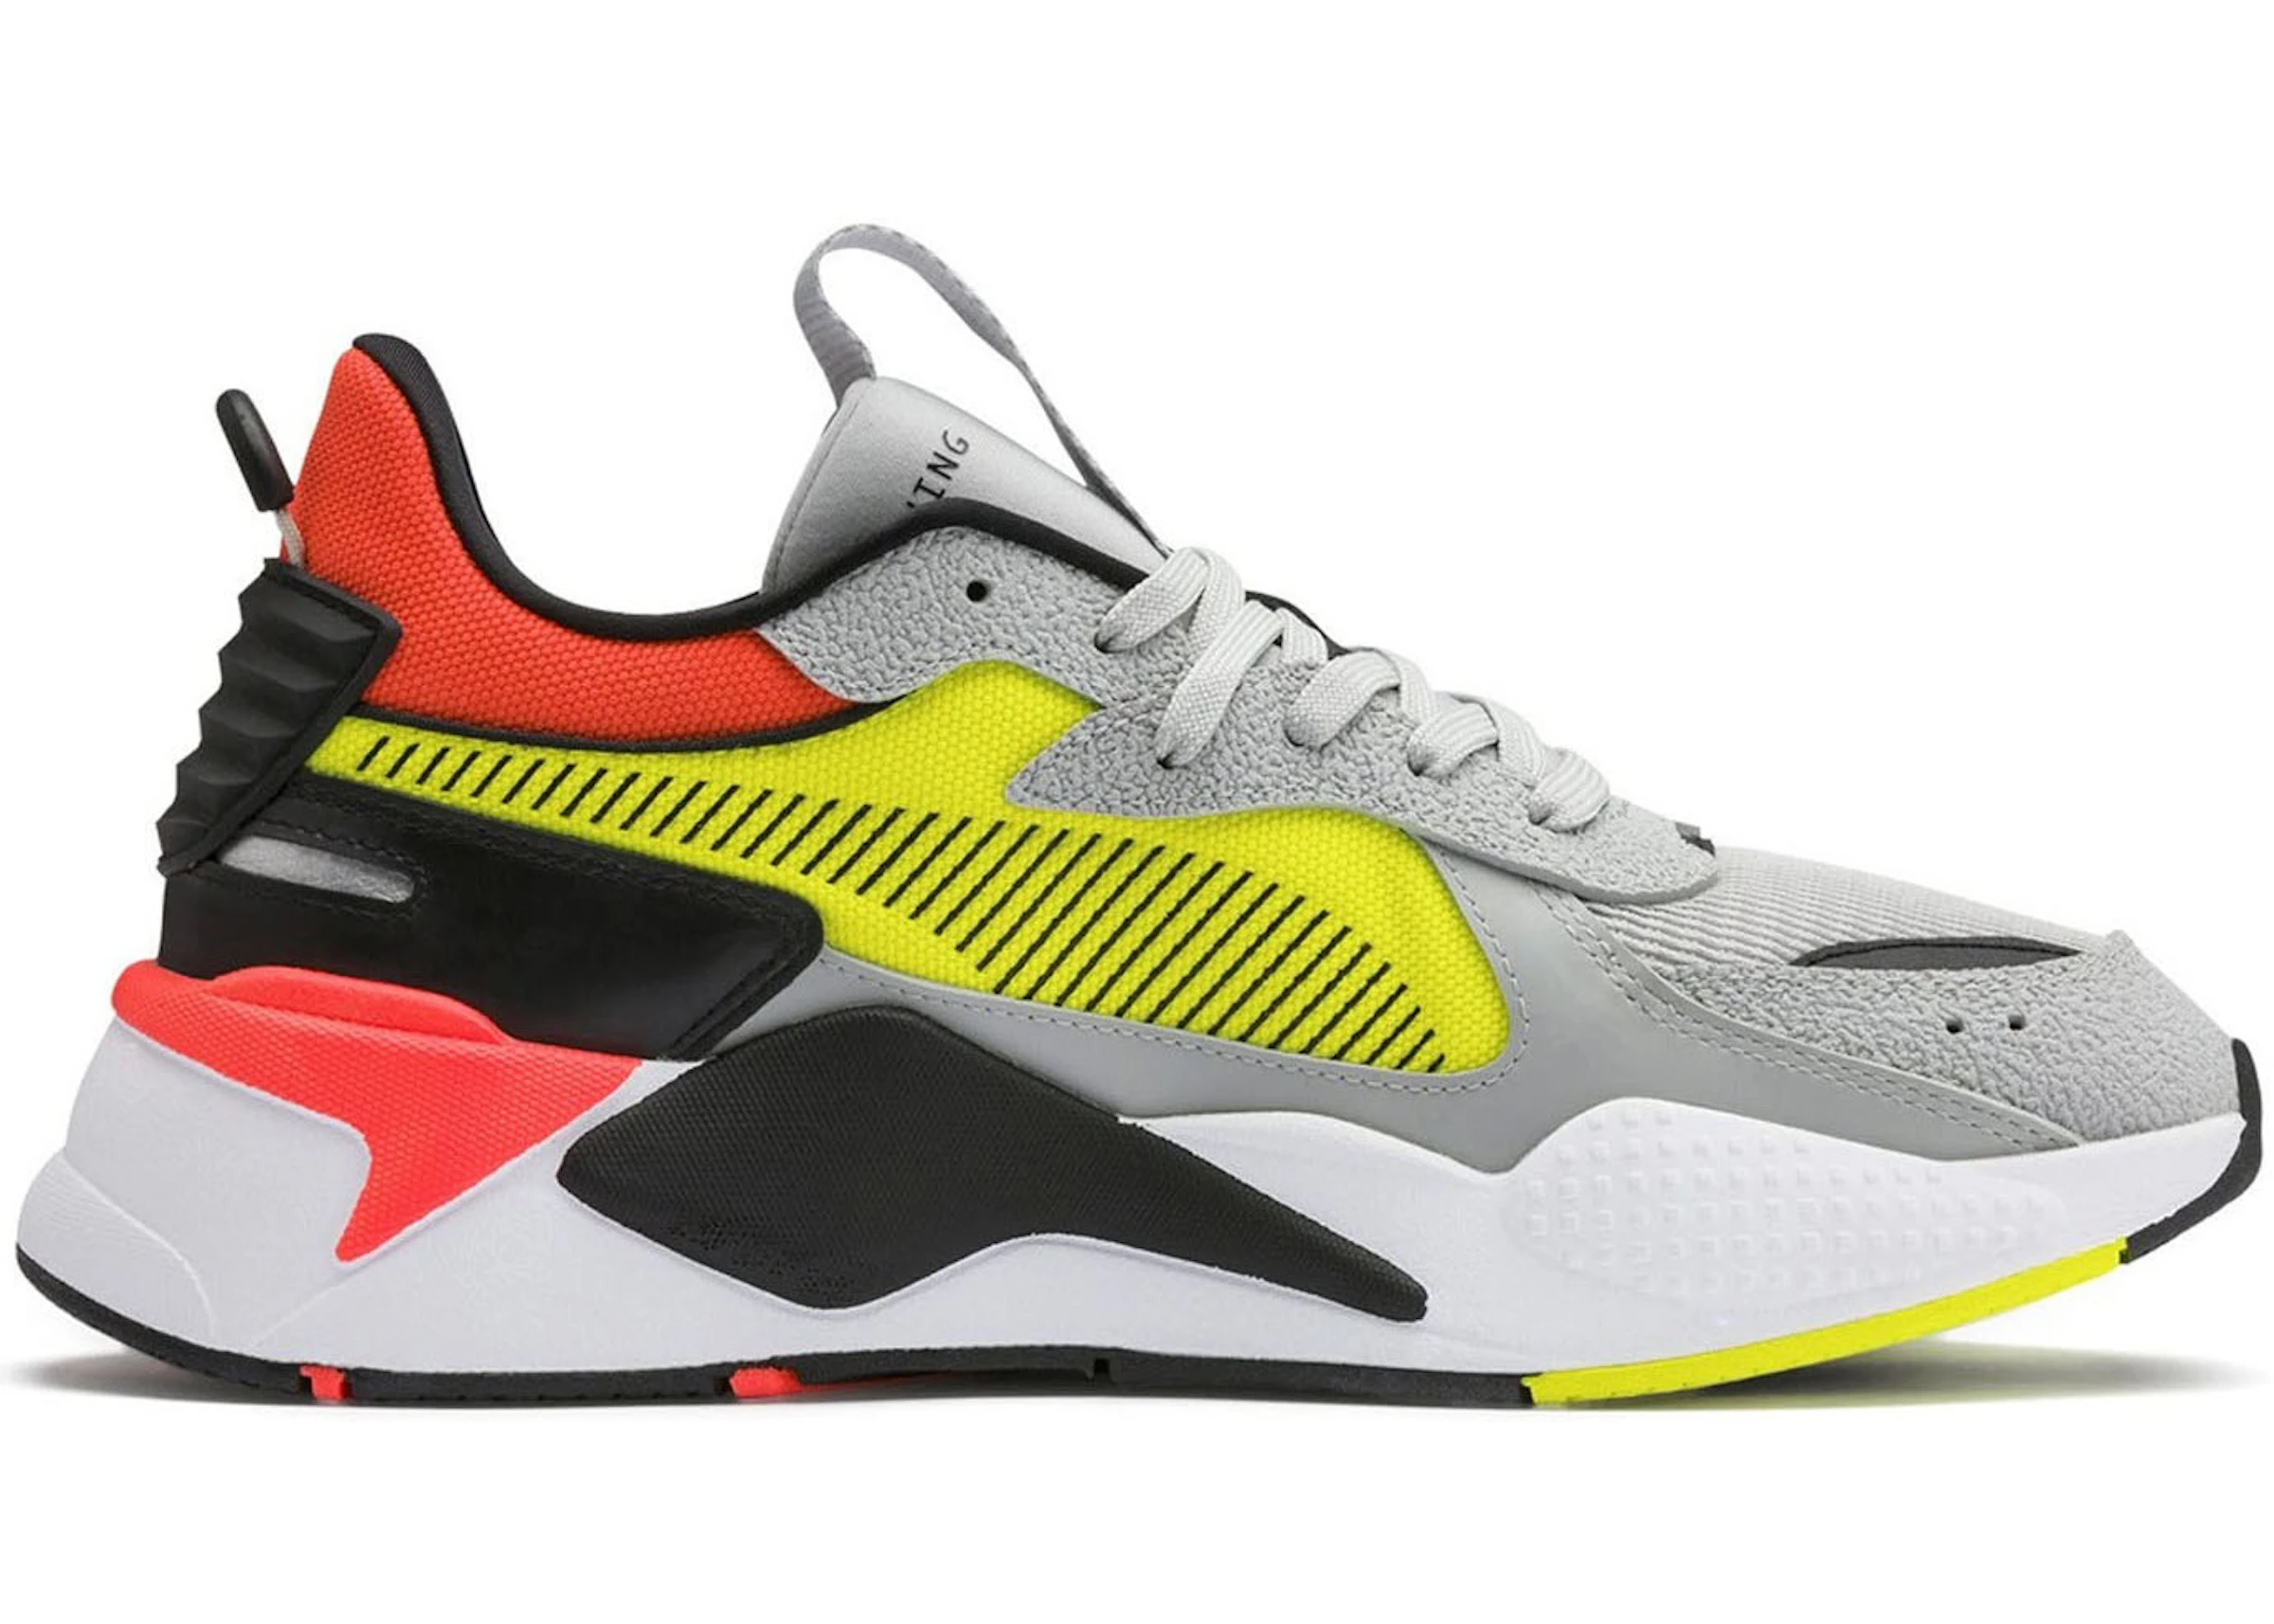 Squire entrepreneur Sympathize Puma RS-X Harddrive Grey Yellow Red - 369818-01 - US